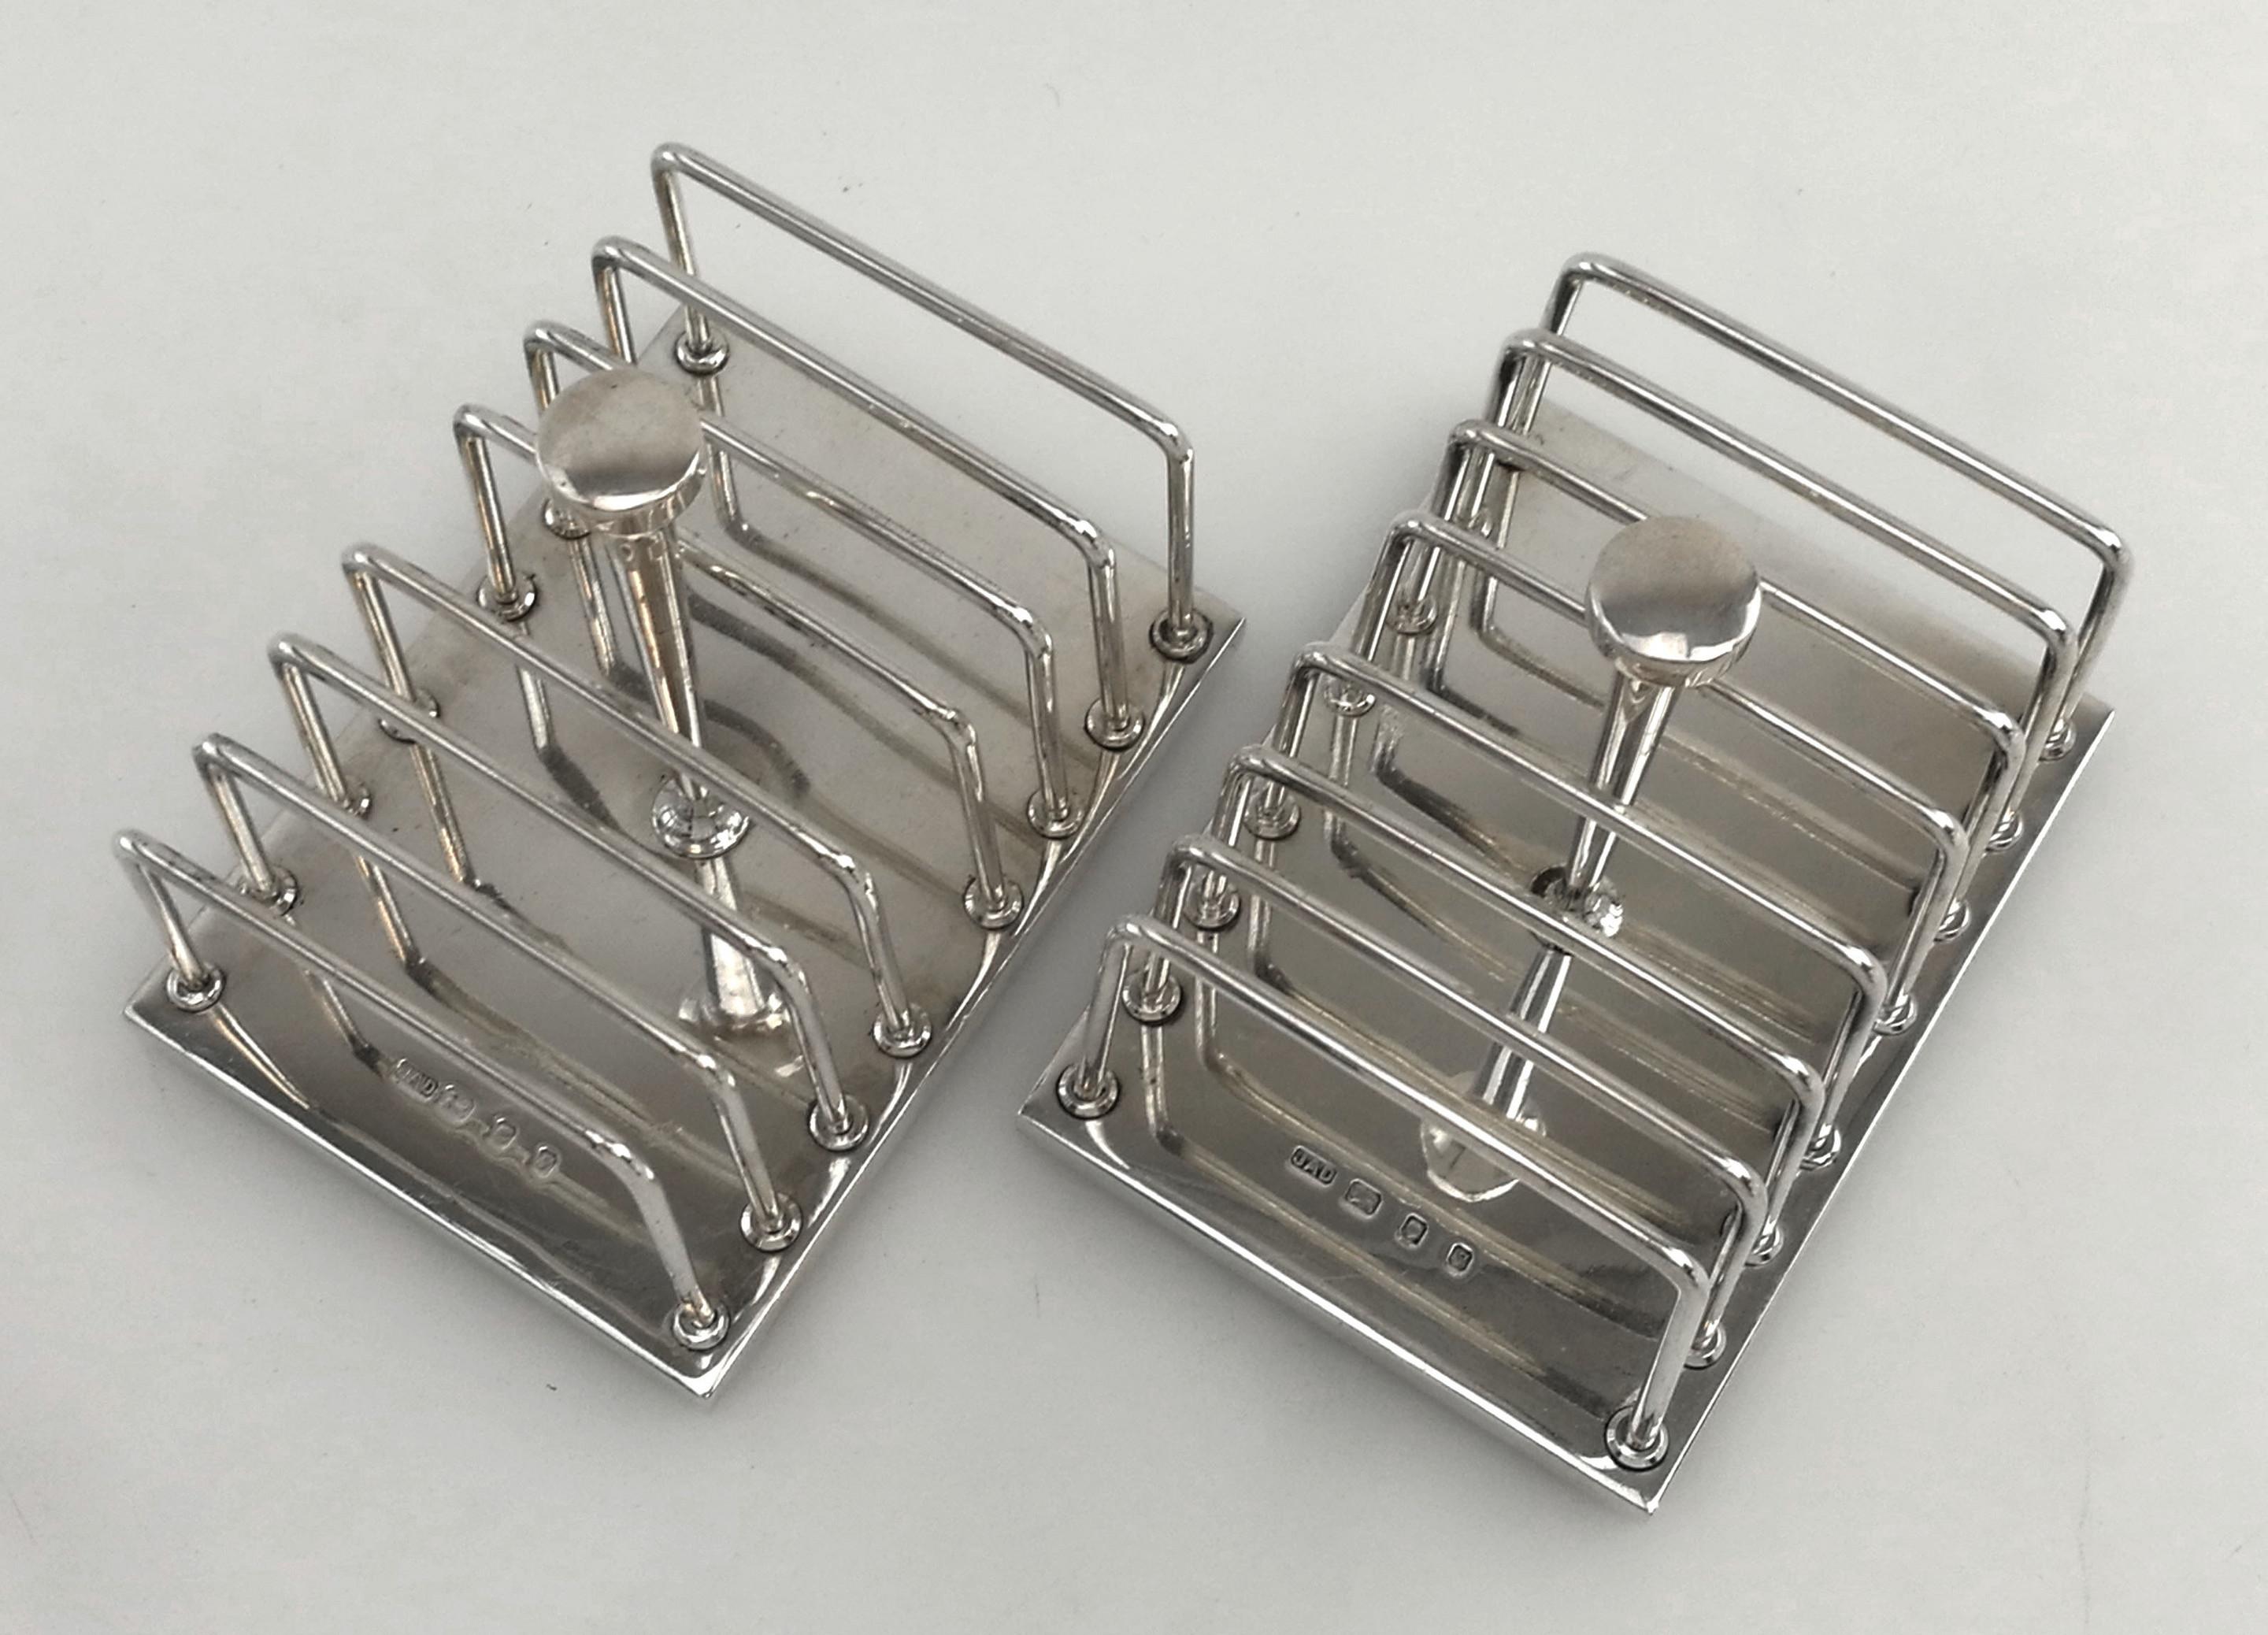 A wonderful pair of Post War modernist sterling silver Toast Racks designed by the esteemed Silversmith Anthony Elson. These Toast Racks feature simple, clean lines and an elegant design.
 
 Made in London in 1973 by JAD and Designed by Anthony